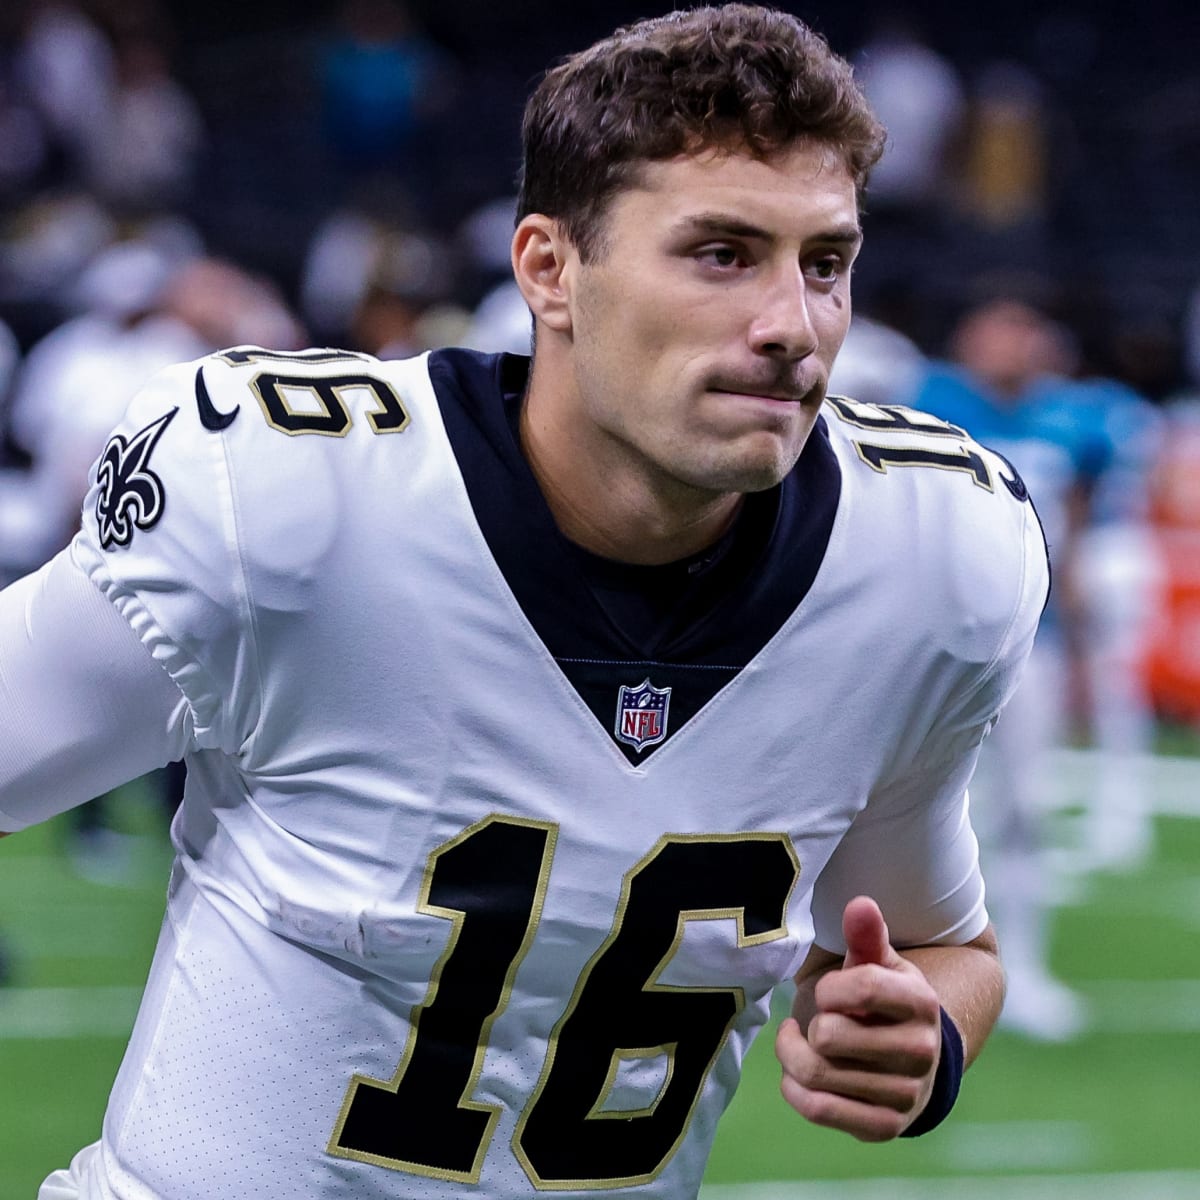 Saints quarterback update: Ian Book to start vs Dolphins with Hill